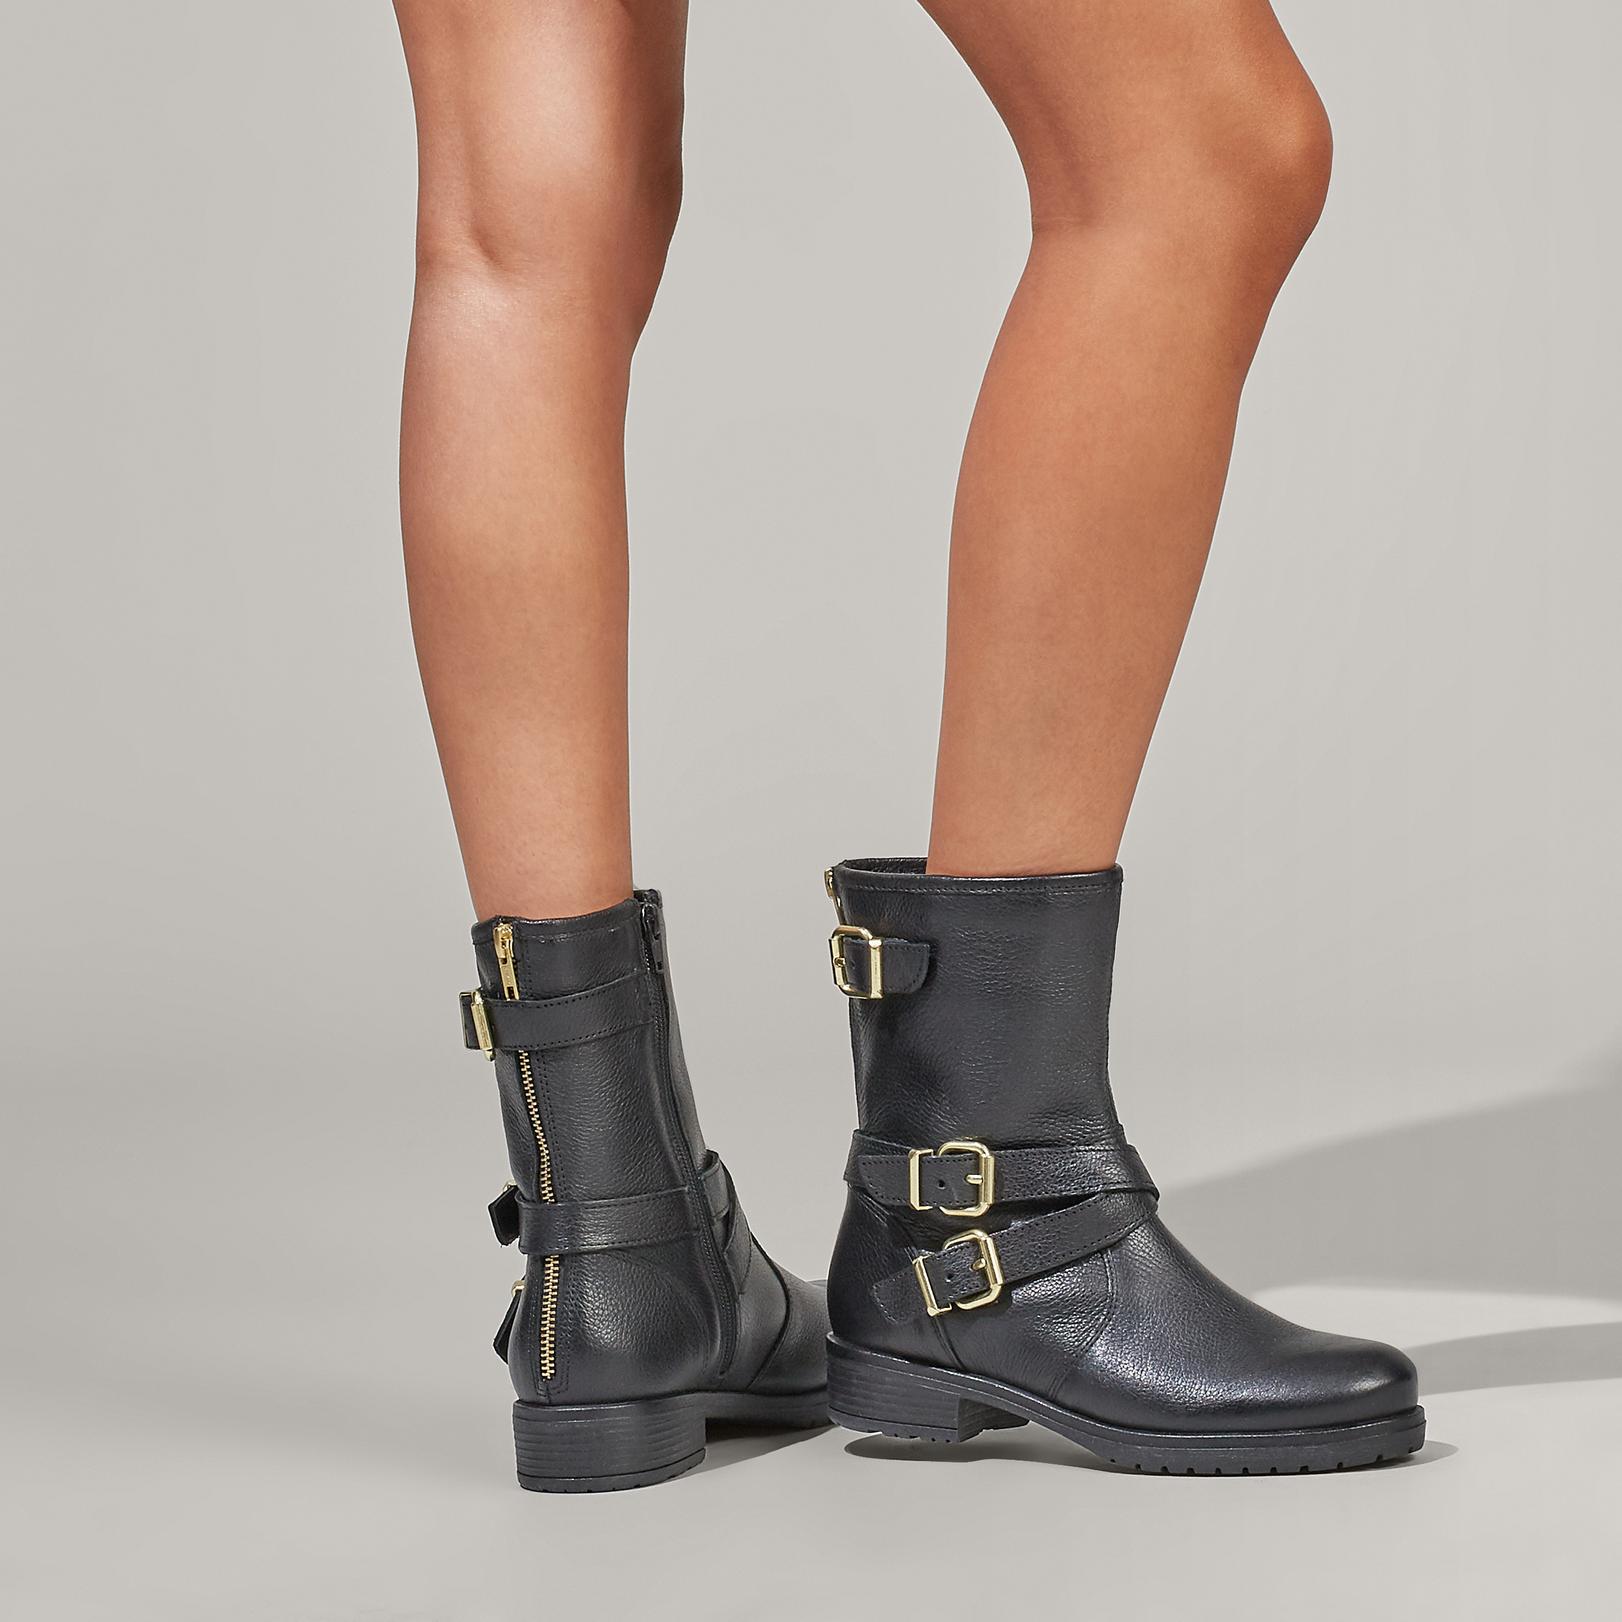 SOULFUL - CARVELA Ankle Boots